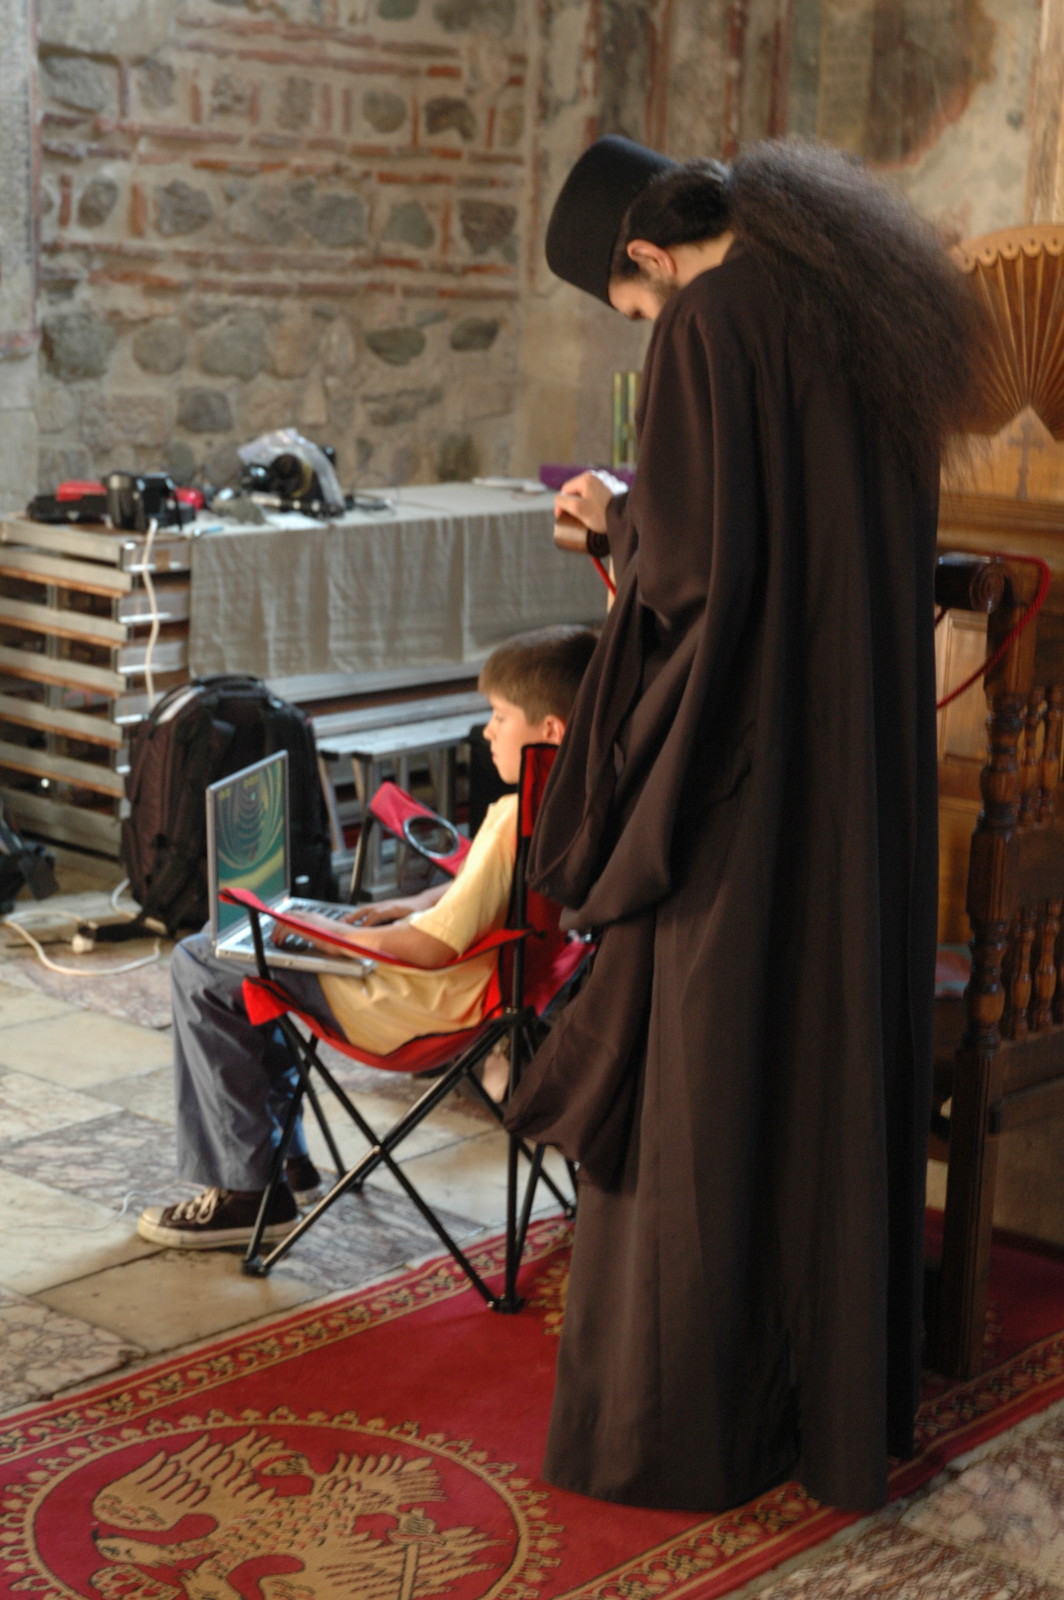 Monk watches Stefan playing games